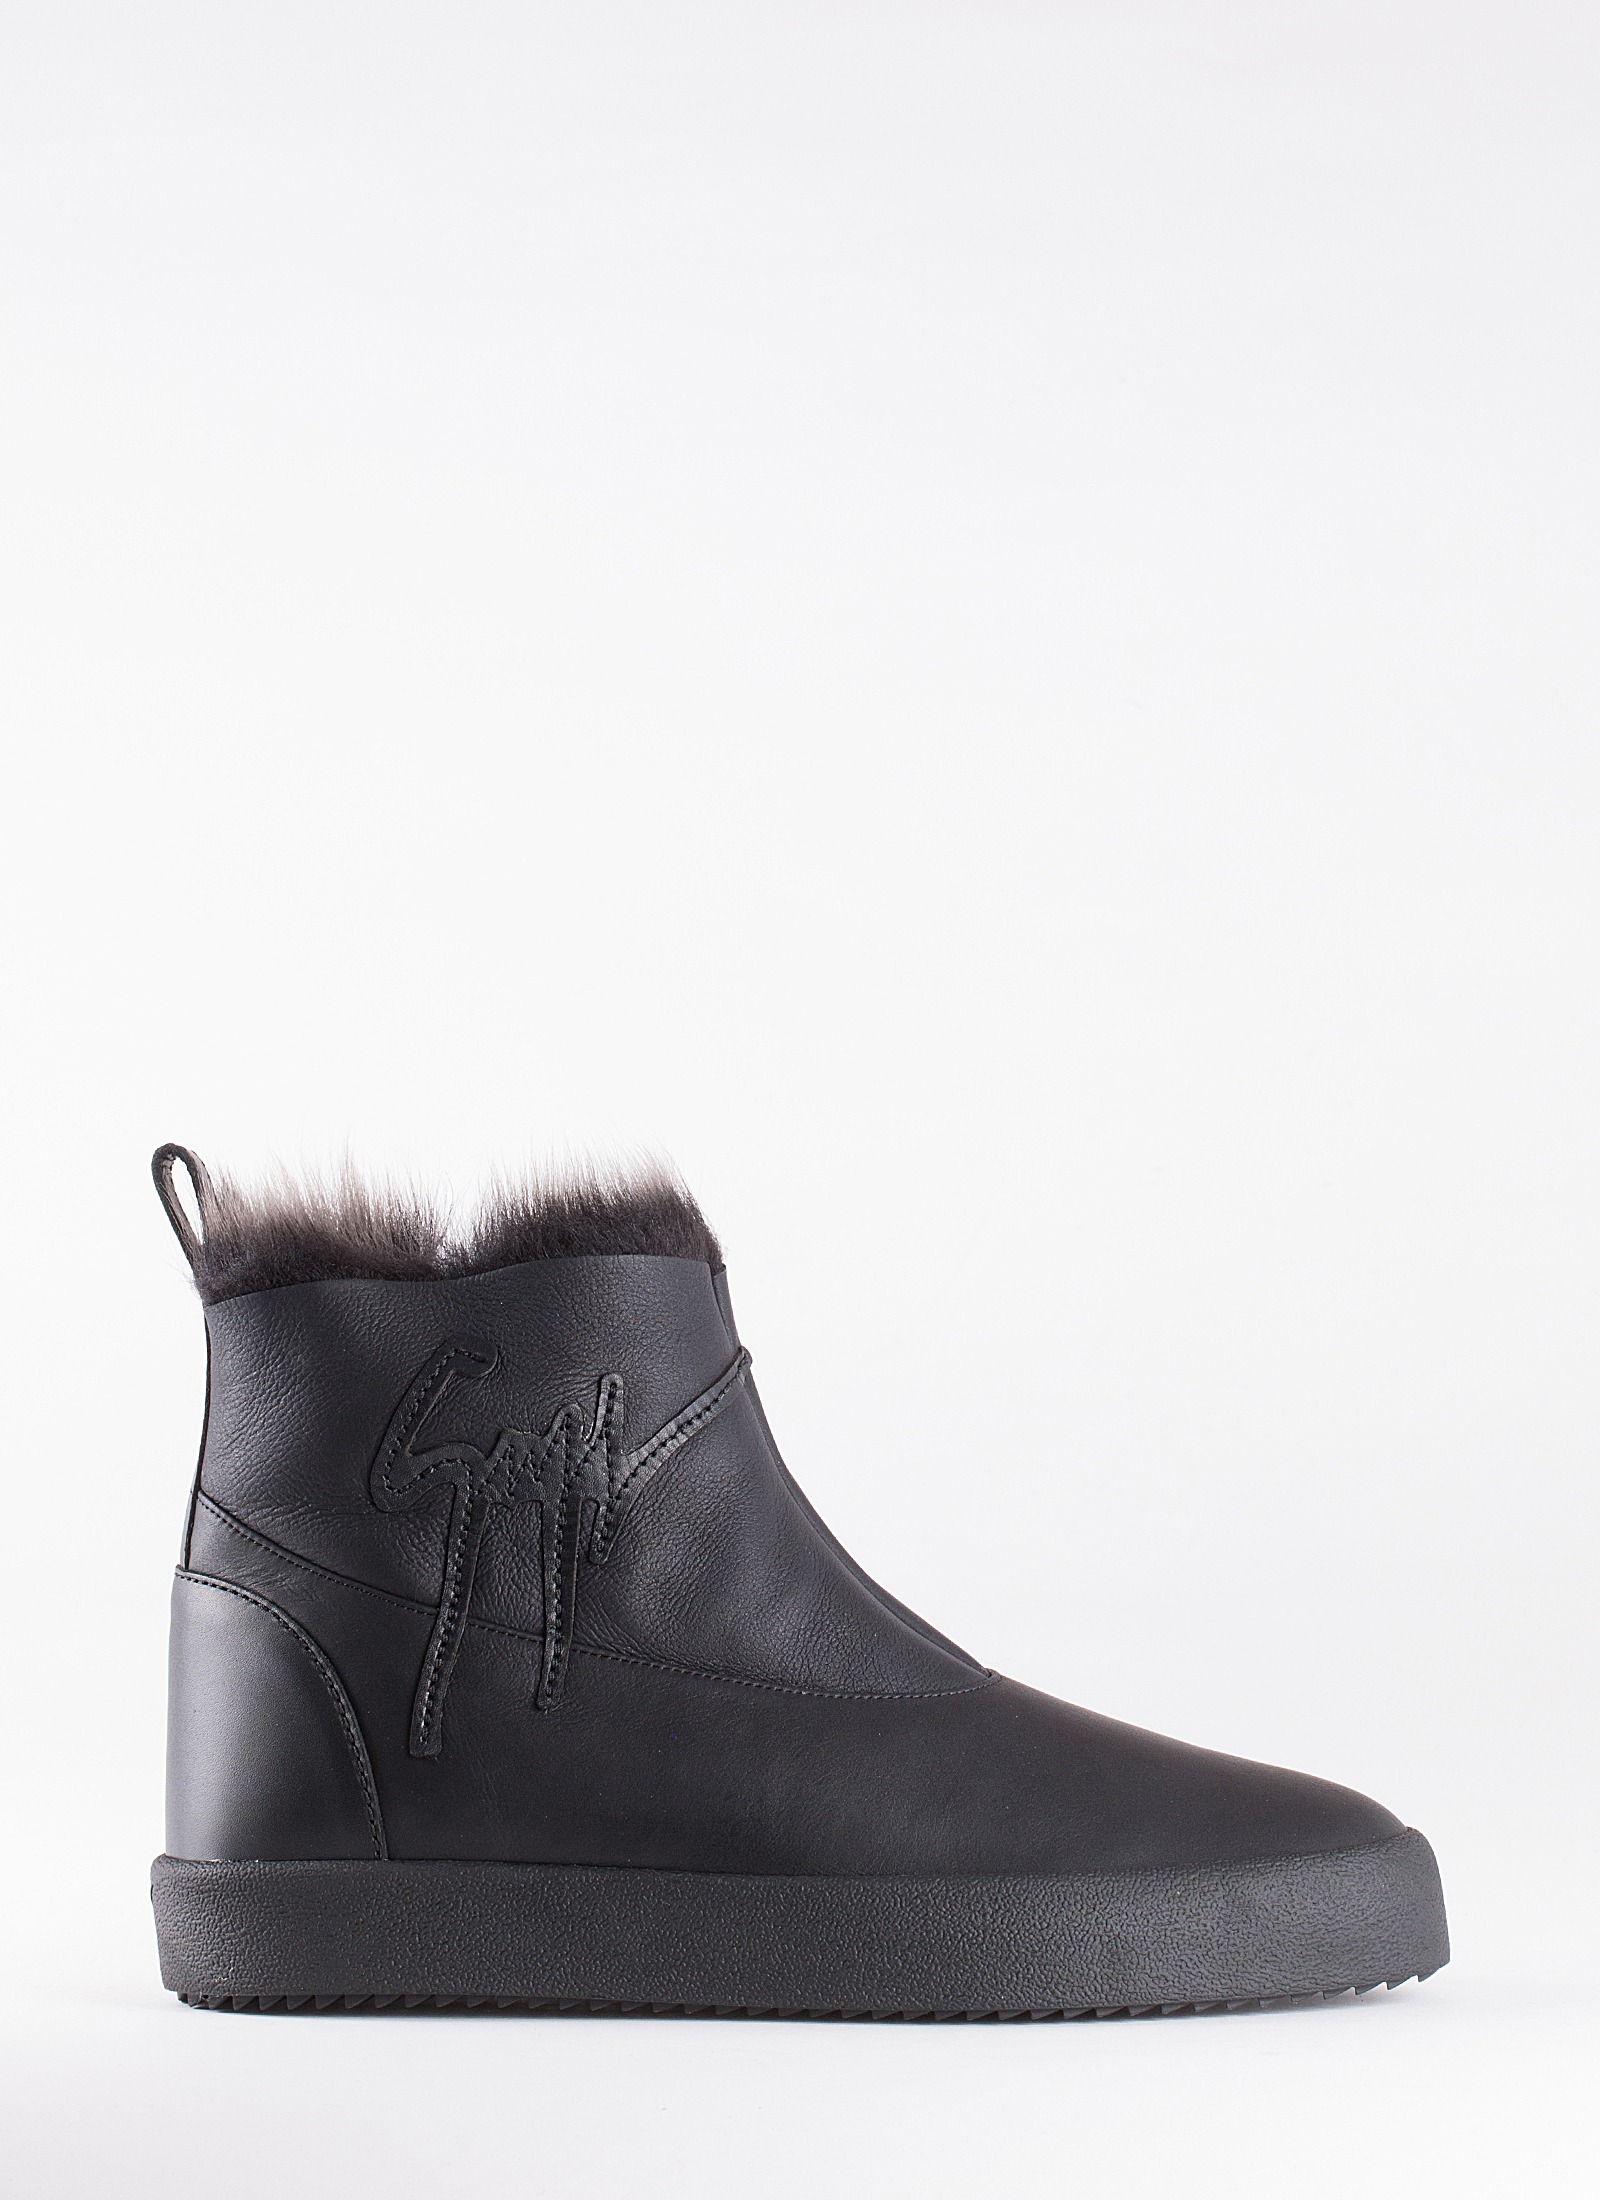 LEATHER BOOTS WITH FUR - GIUSEPPE ZANOTTI